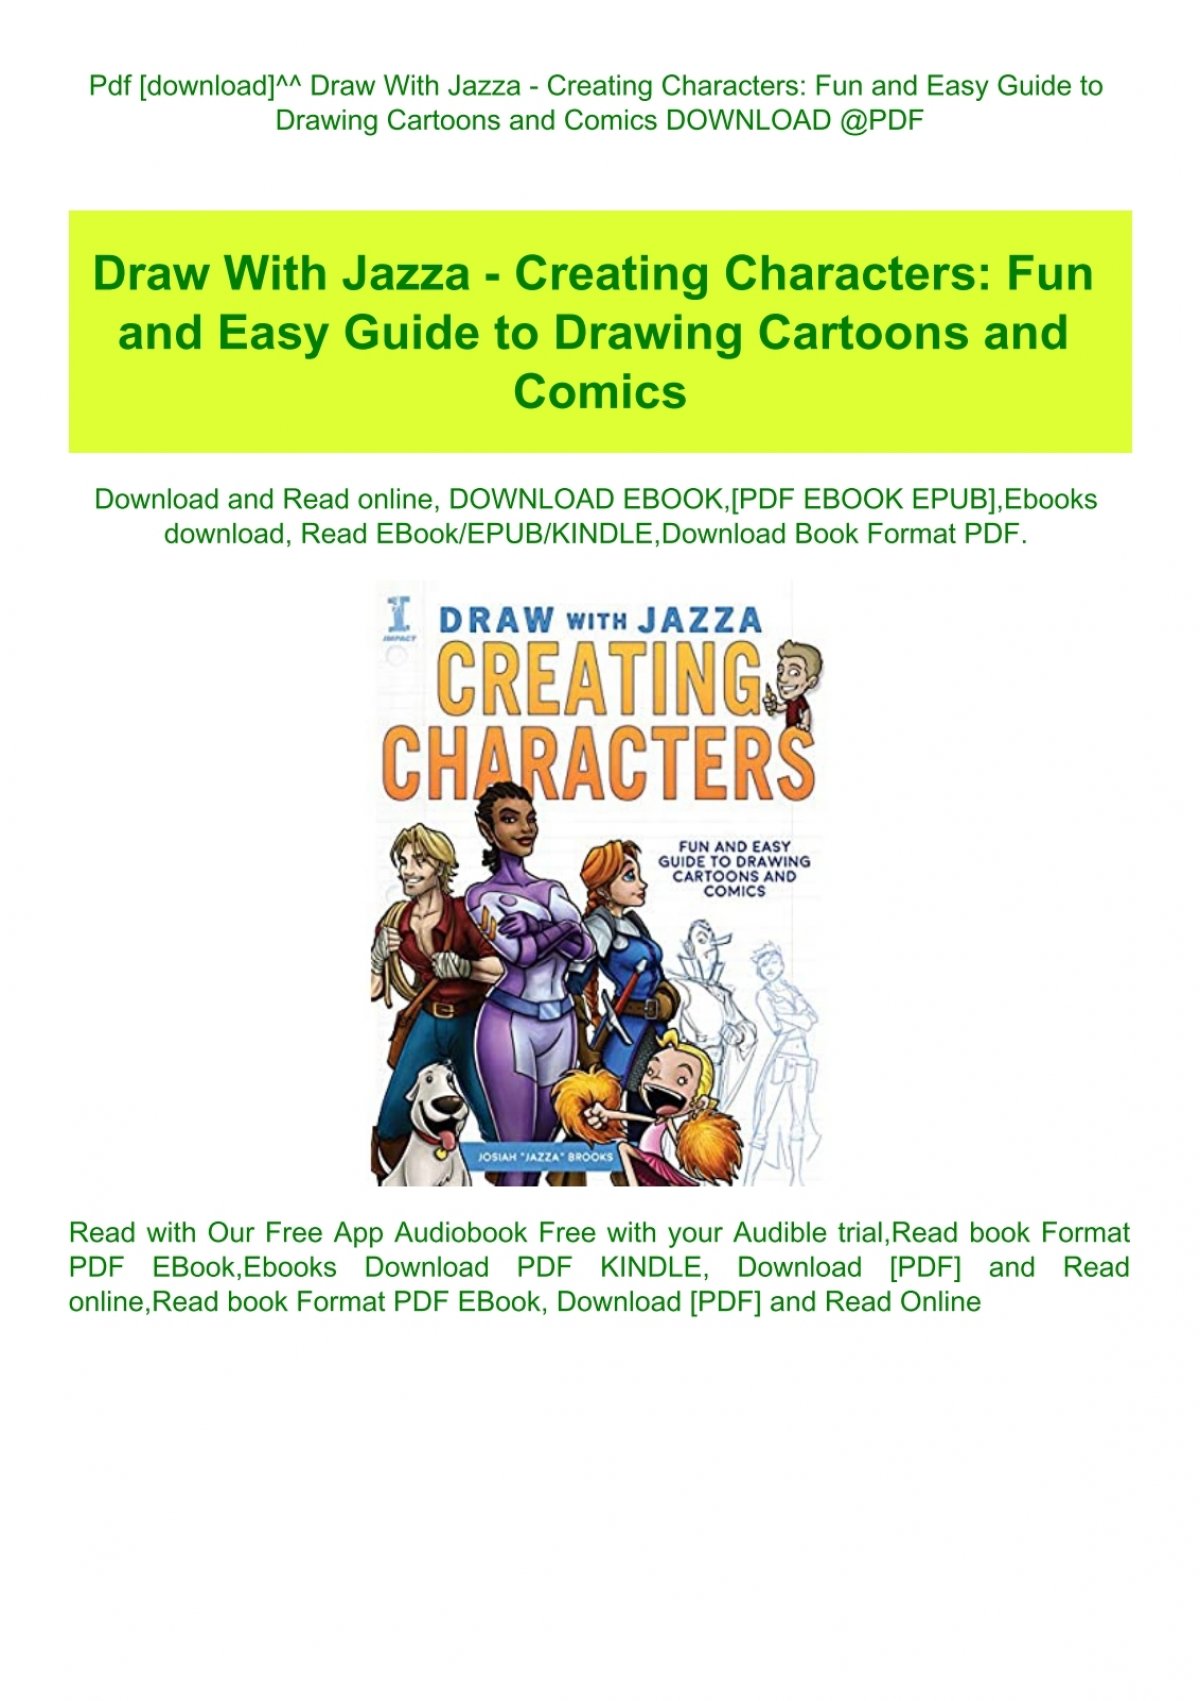 Pdf Download Draw With Jazza Creating Characters Fun And Easy Guide To Drawing Cartoons And Comics Download Pdf